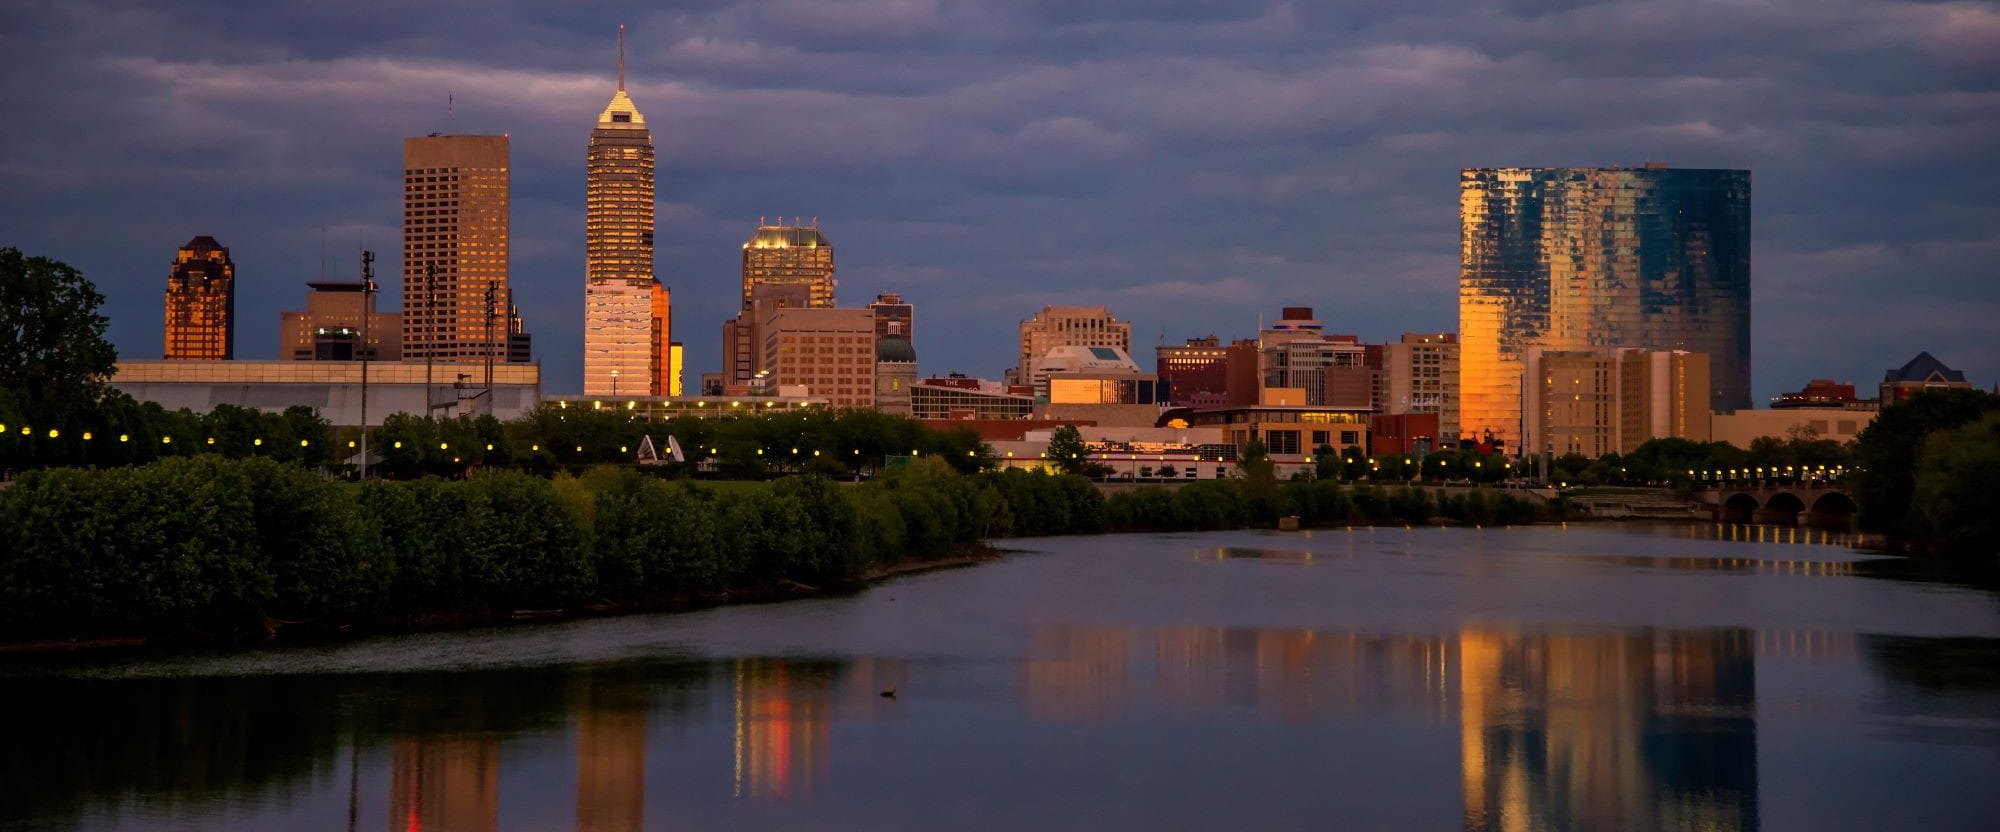 the indianapolis skyline is lit up at sunset. the white river flows gently in the foreground. There are moody dark clouds behind the buildings.